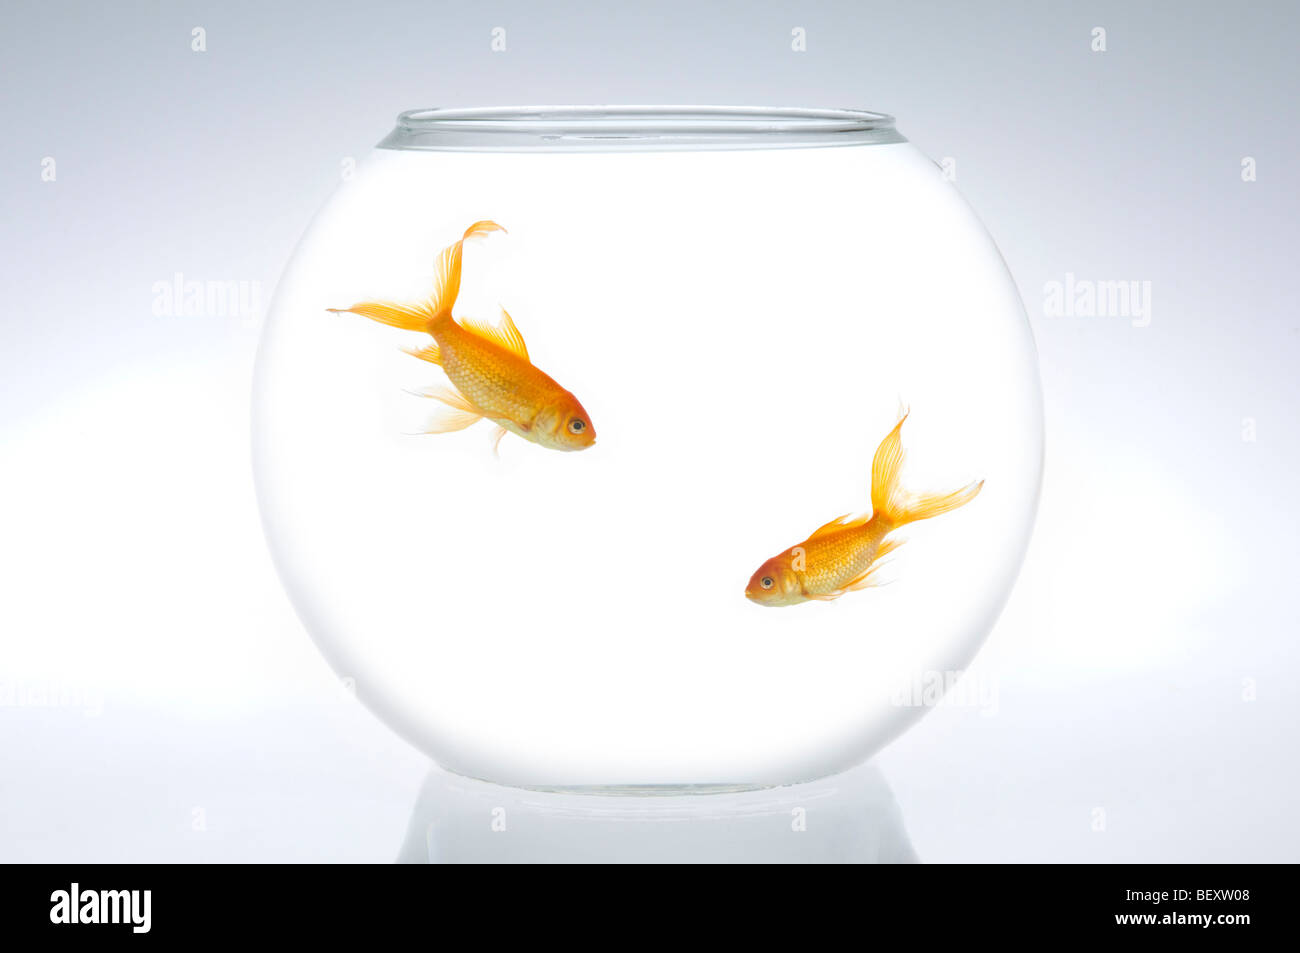 Two fantail goldfish (Carassius auratus) in a bowl. Stock Photo